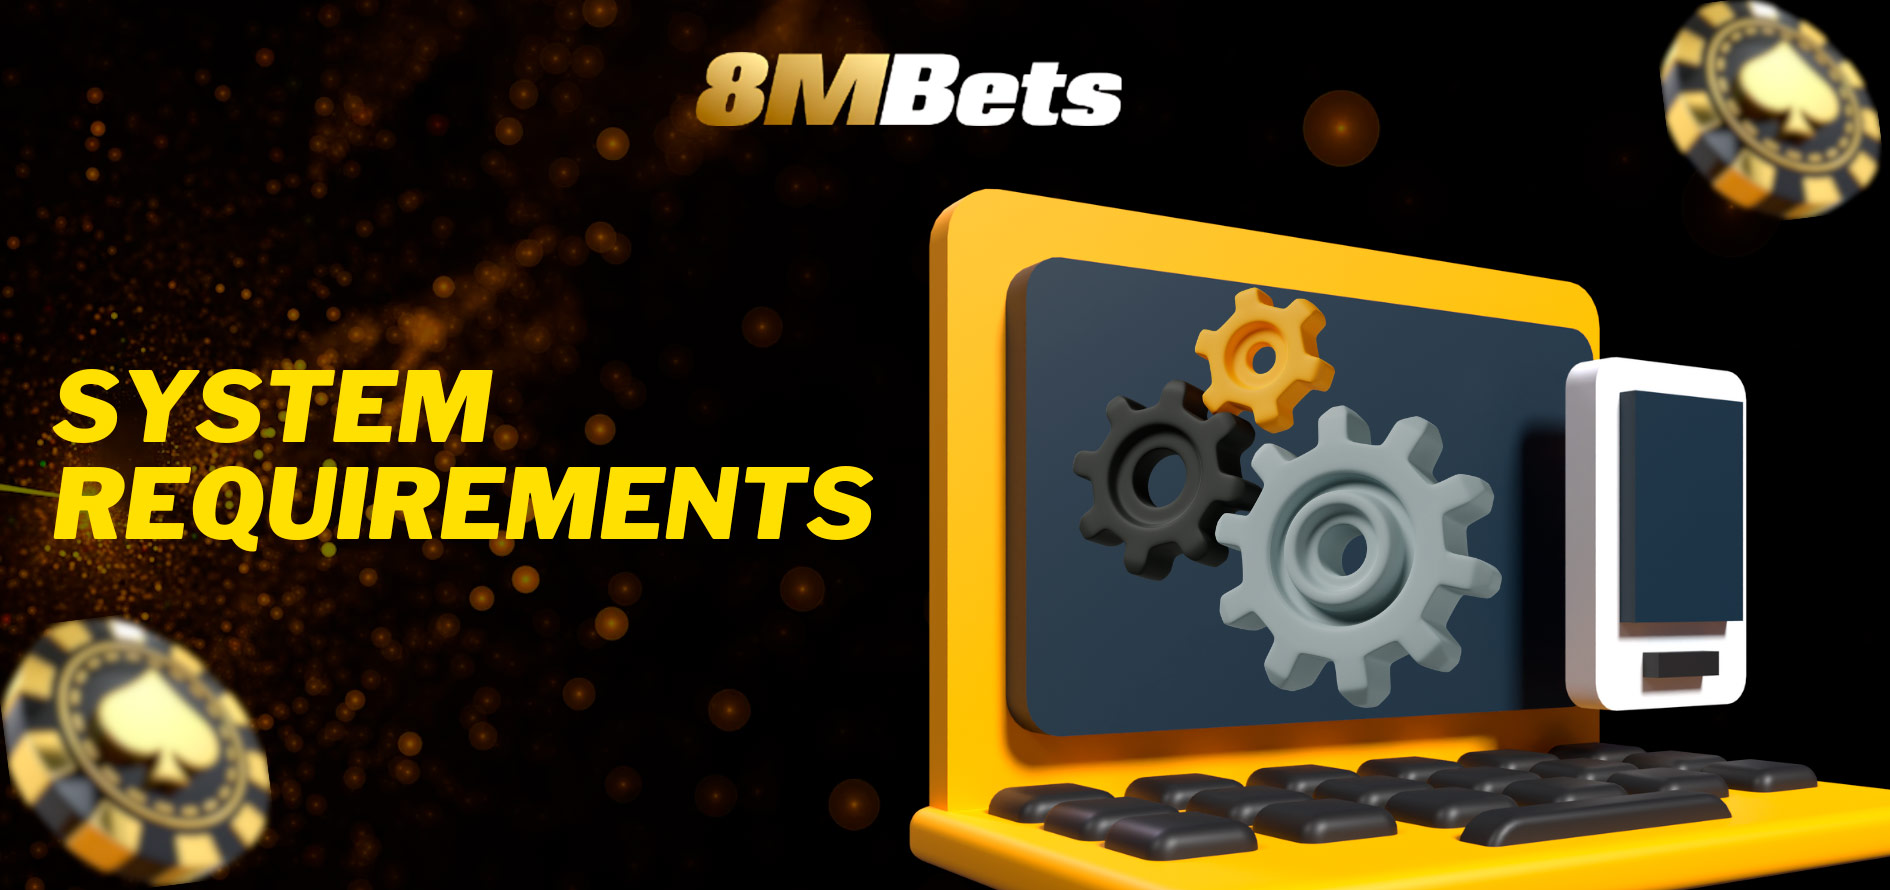 Experience the Ultimate Betting Action with 8mbets App for Android